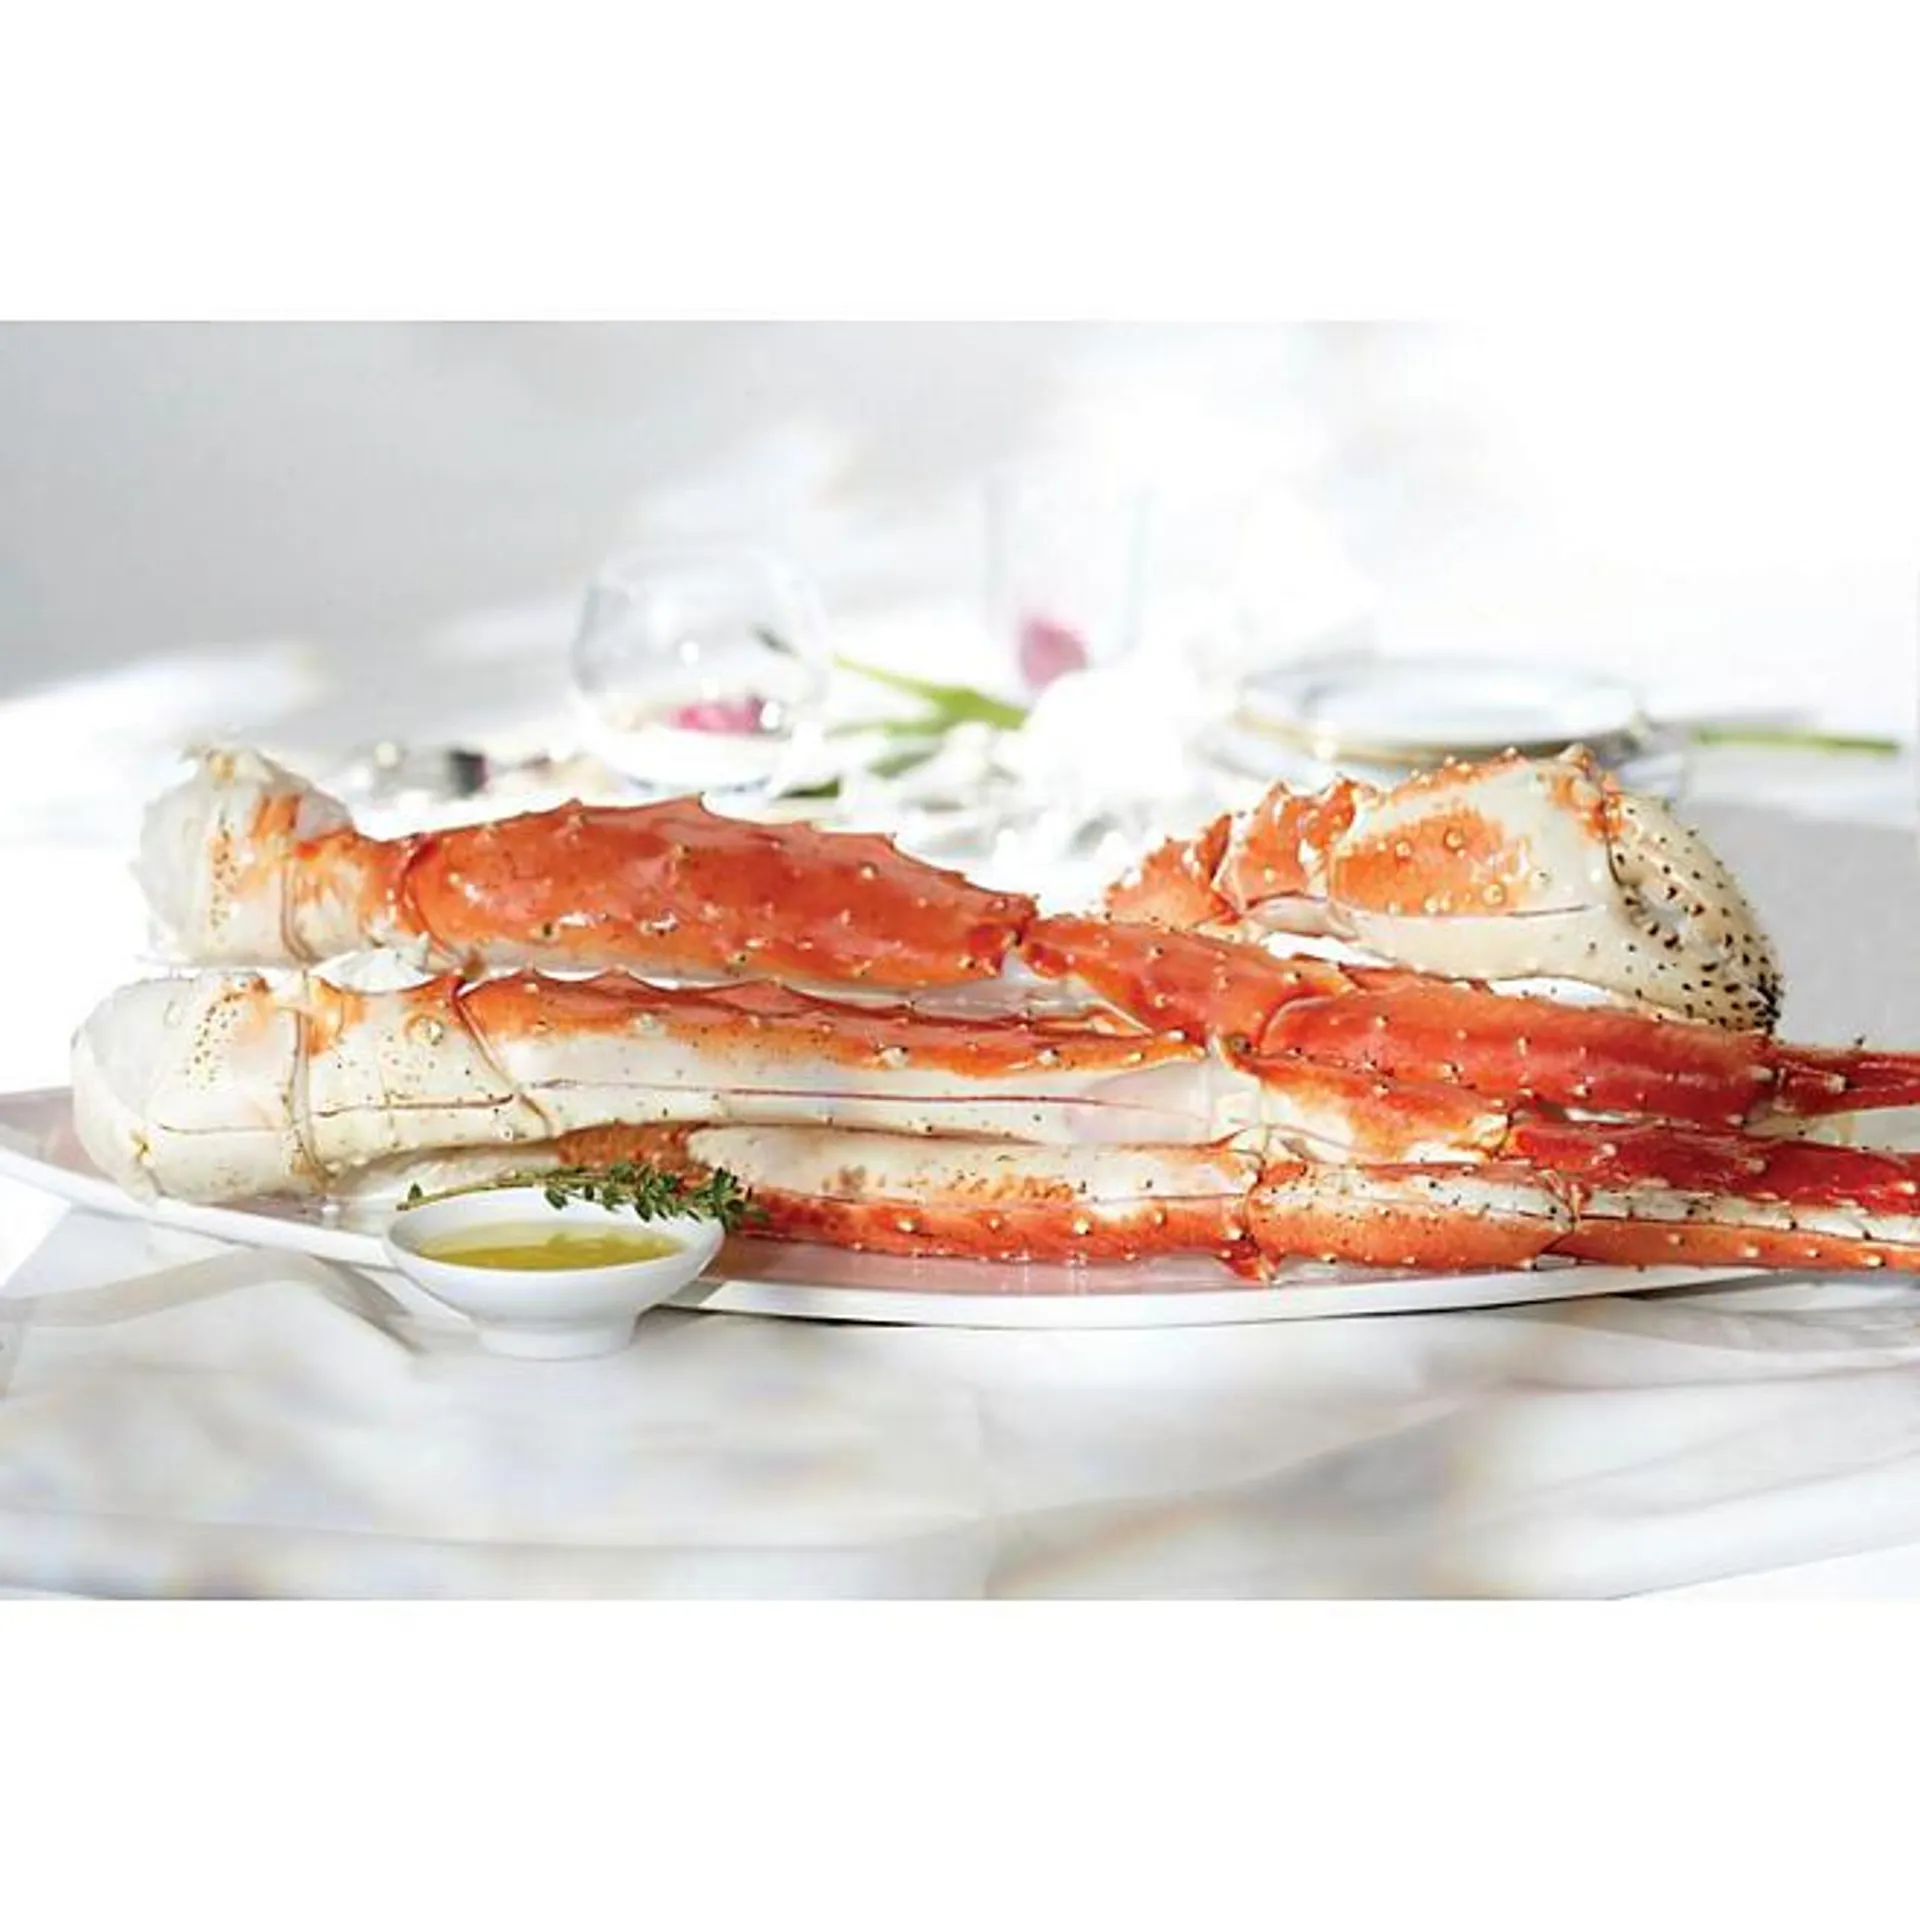 Aqua Star King Crab Legs and Claws With Butter, Frozen (2 lbs.)